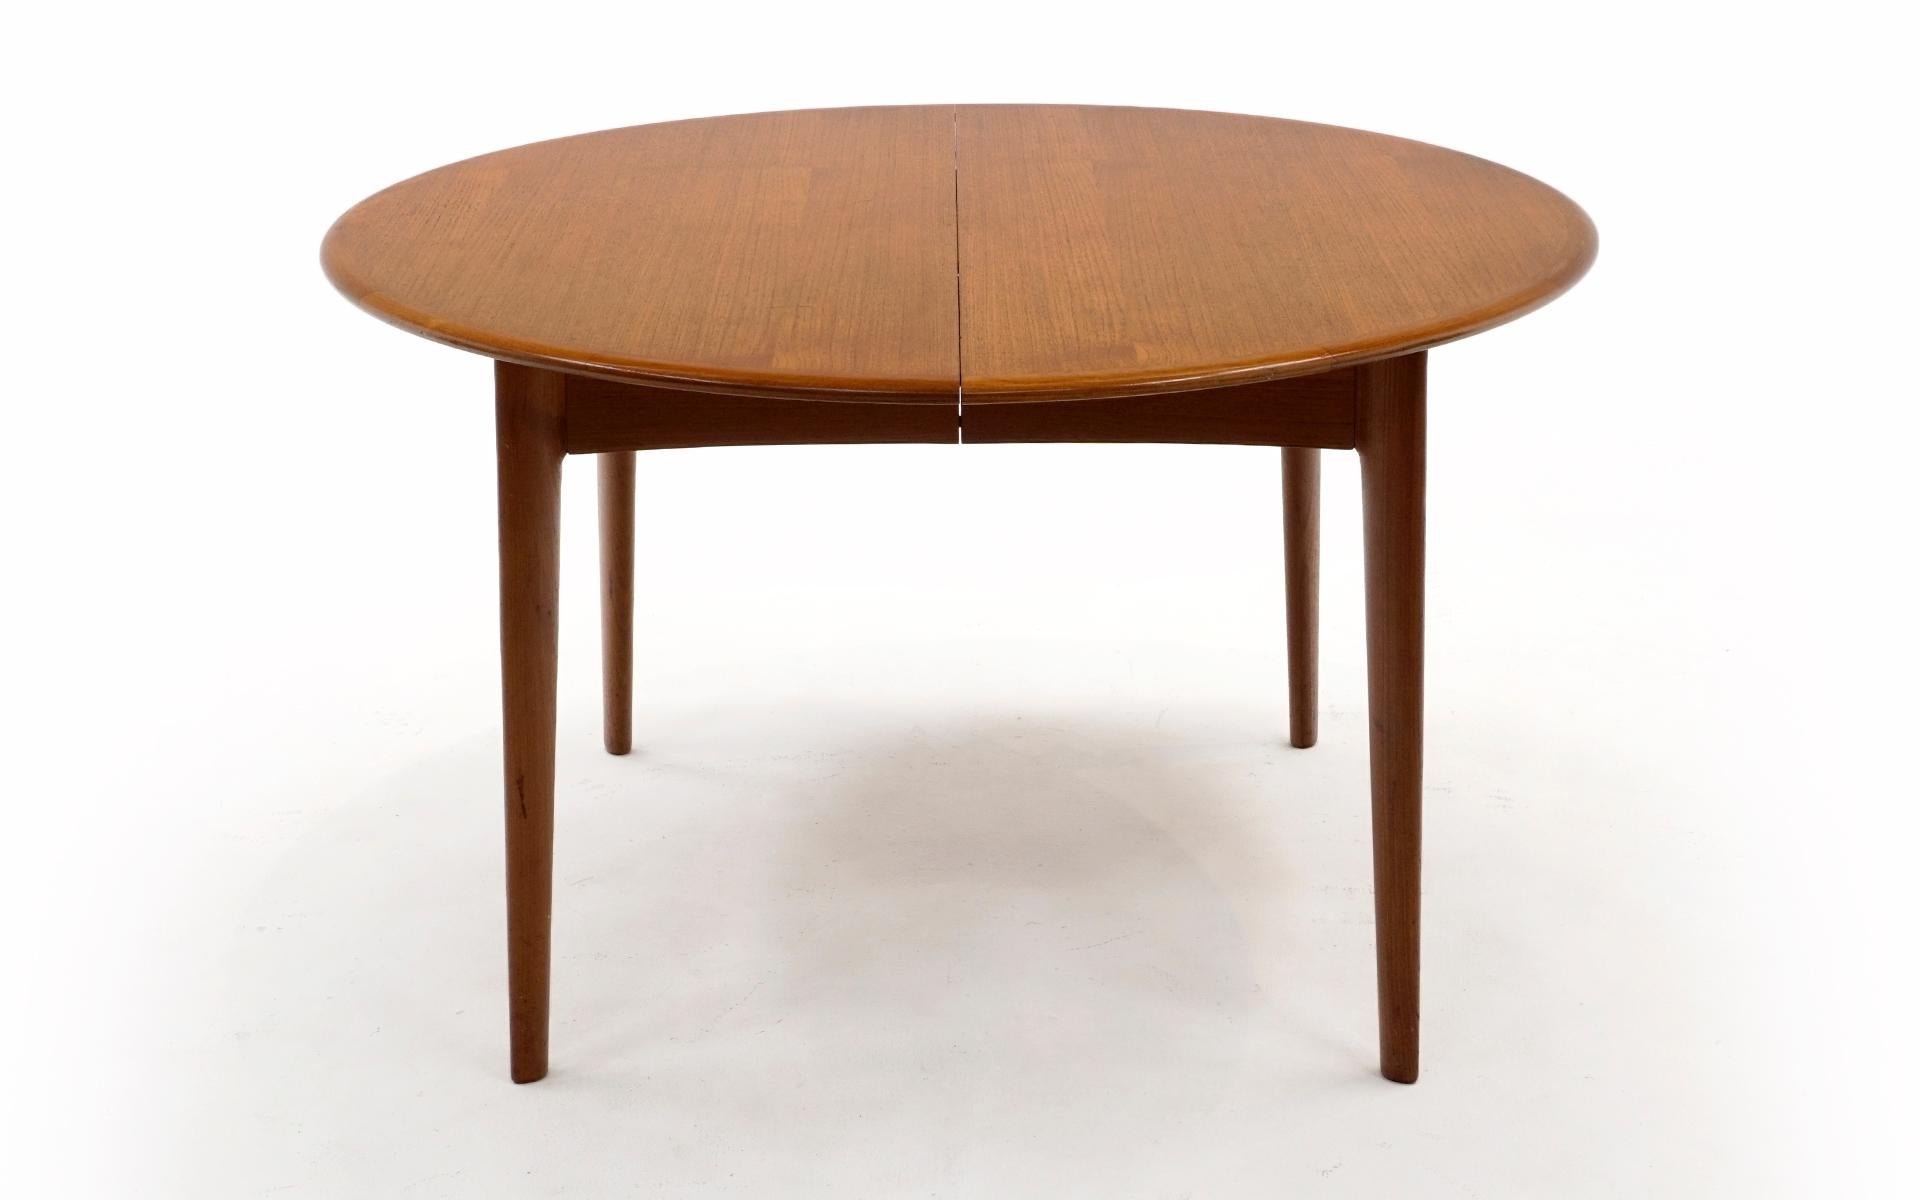 Round Expandable Danish Modern Teak Dining Table with Two Leaves, 1962, Original 3